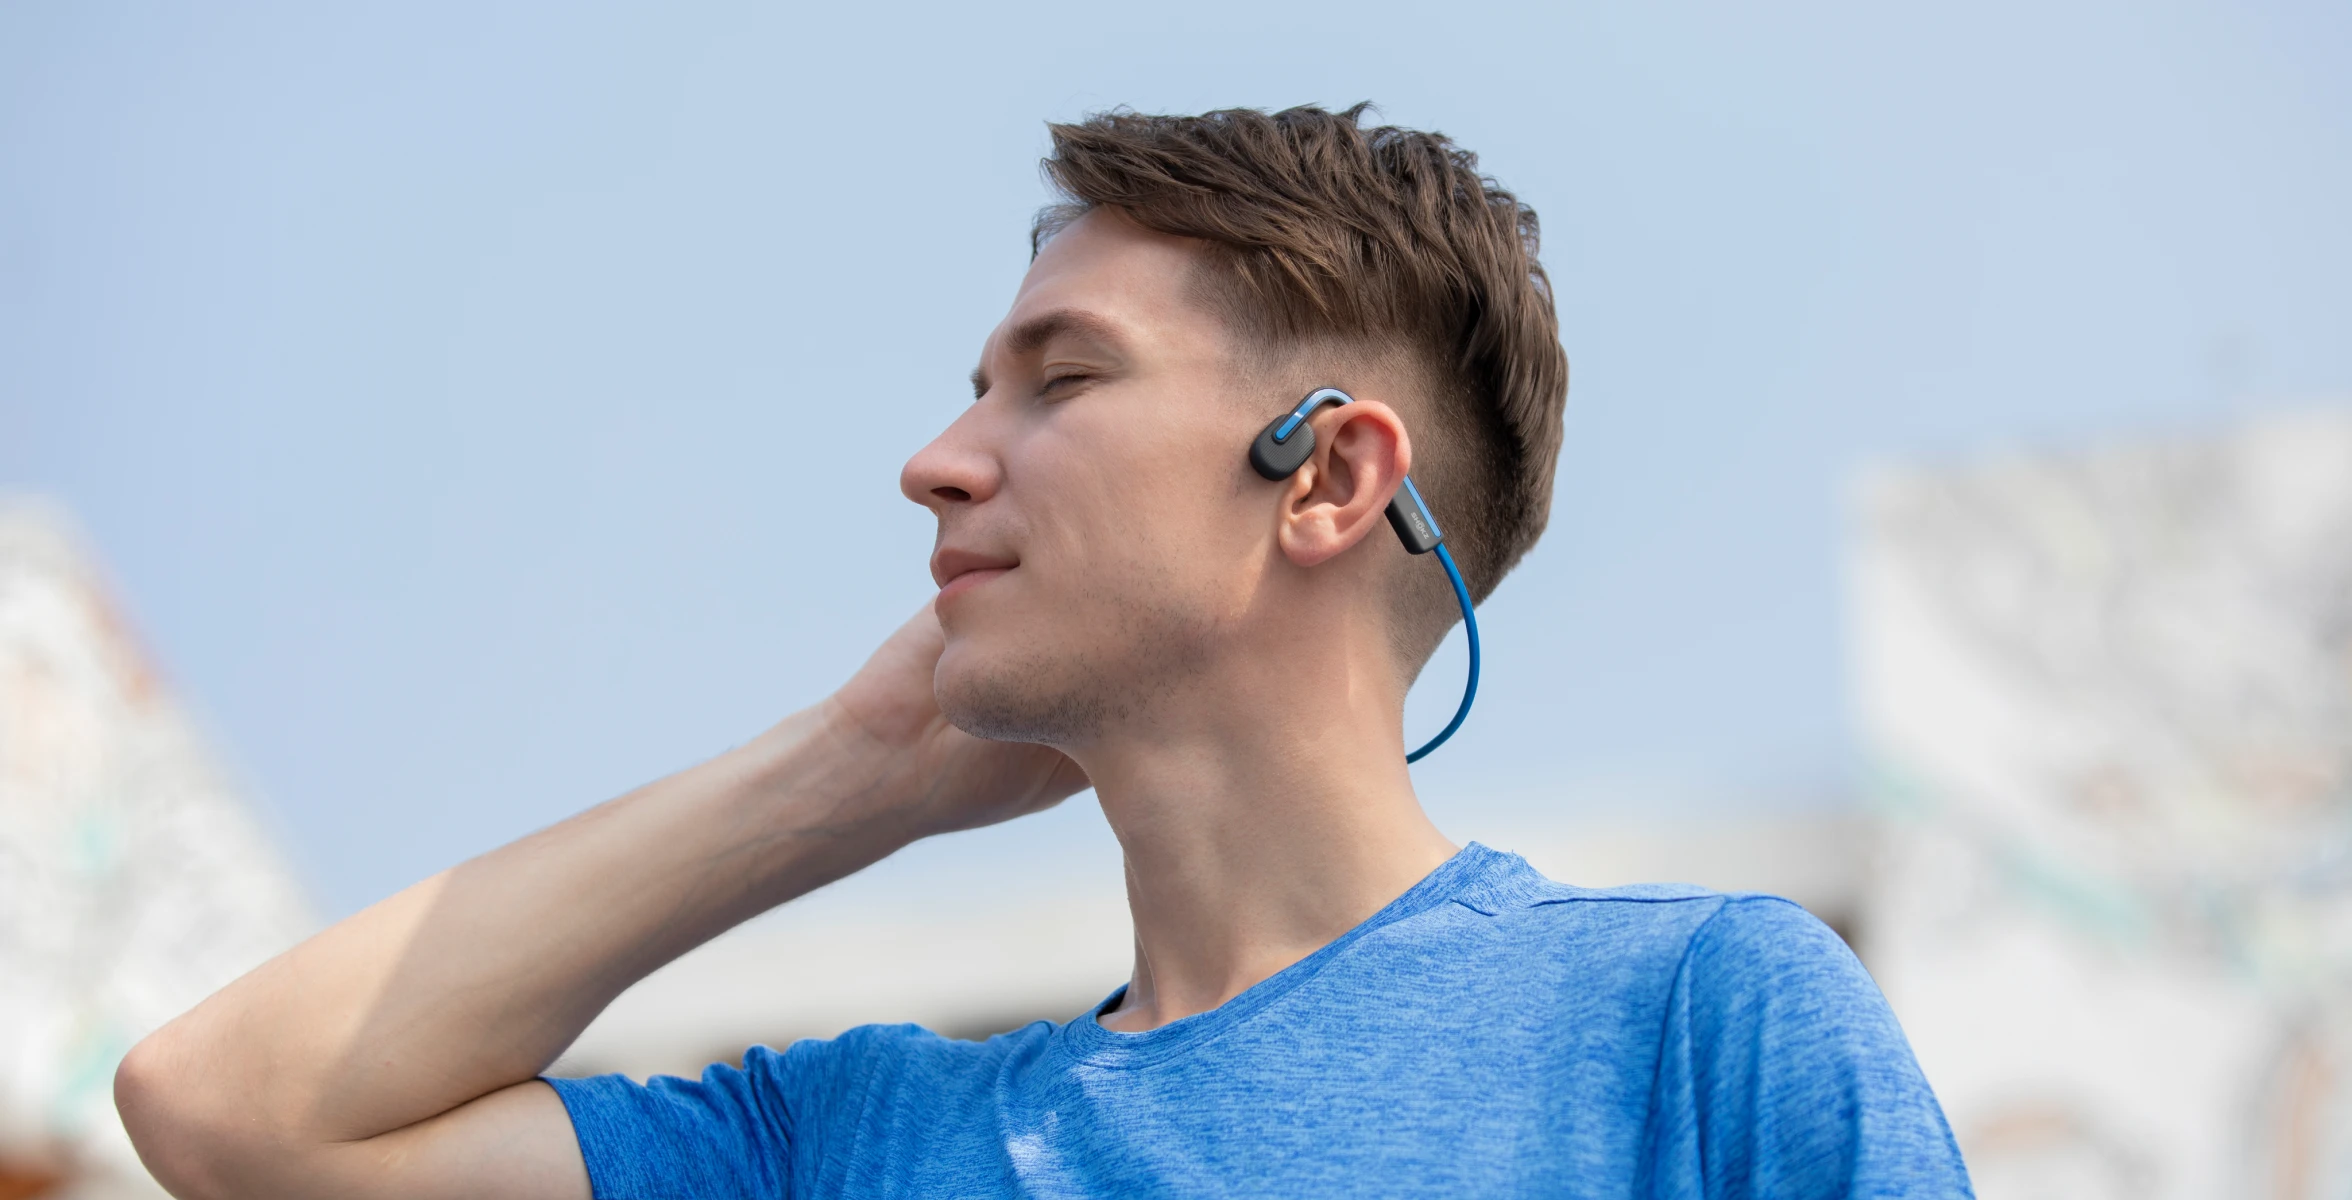 sports bluetooth headphones allow to easy controls